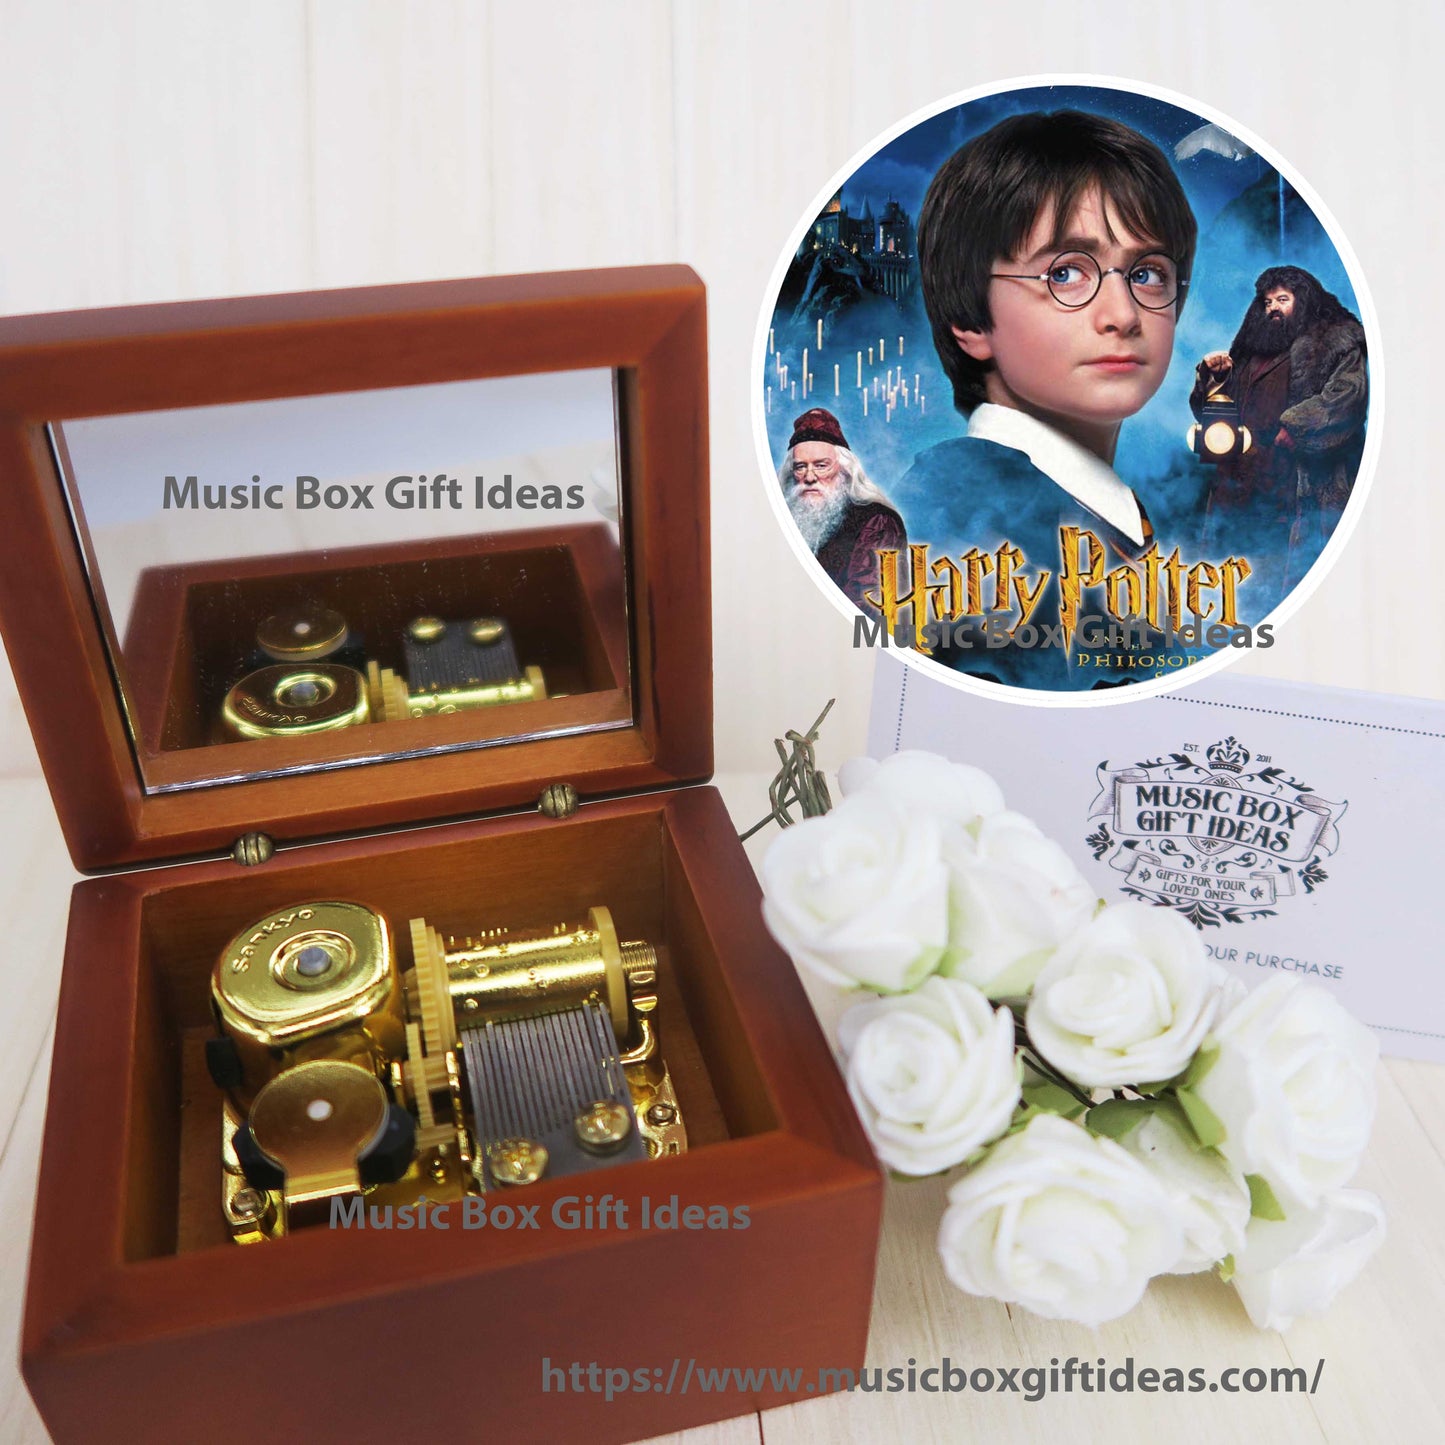 Harry Potter Hedwig's Theme Soundtrack 18-Note Music Box Gift (Wooden Clockwork) - Music Box Gift Ideas